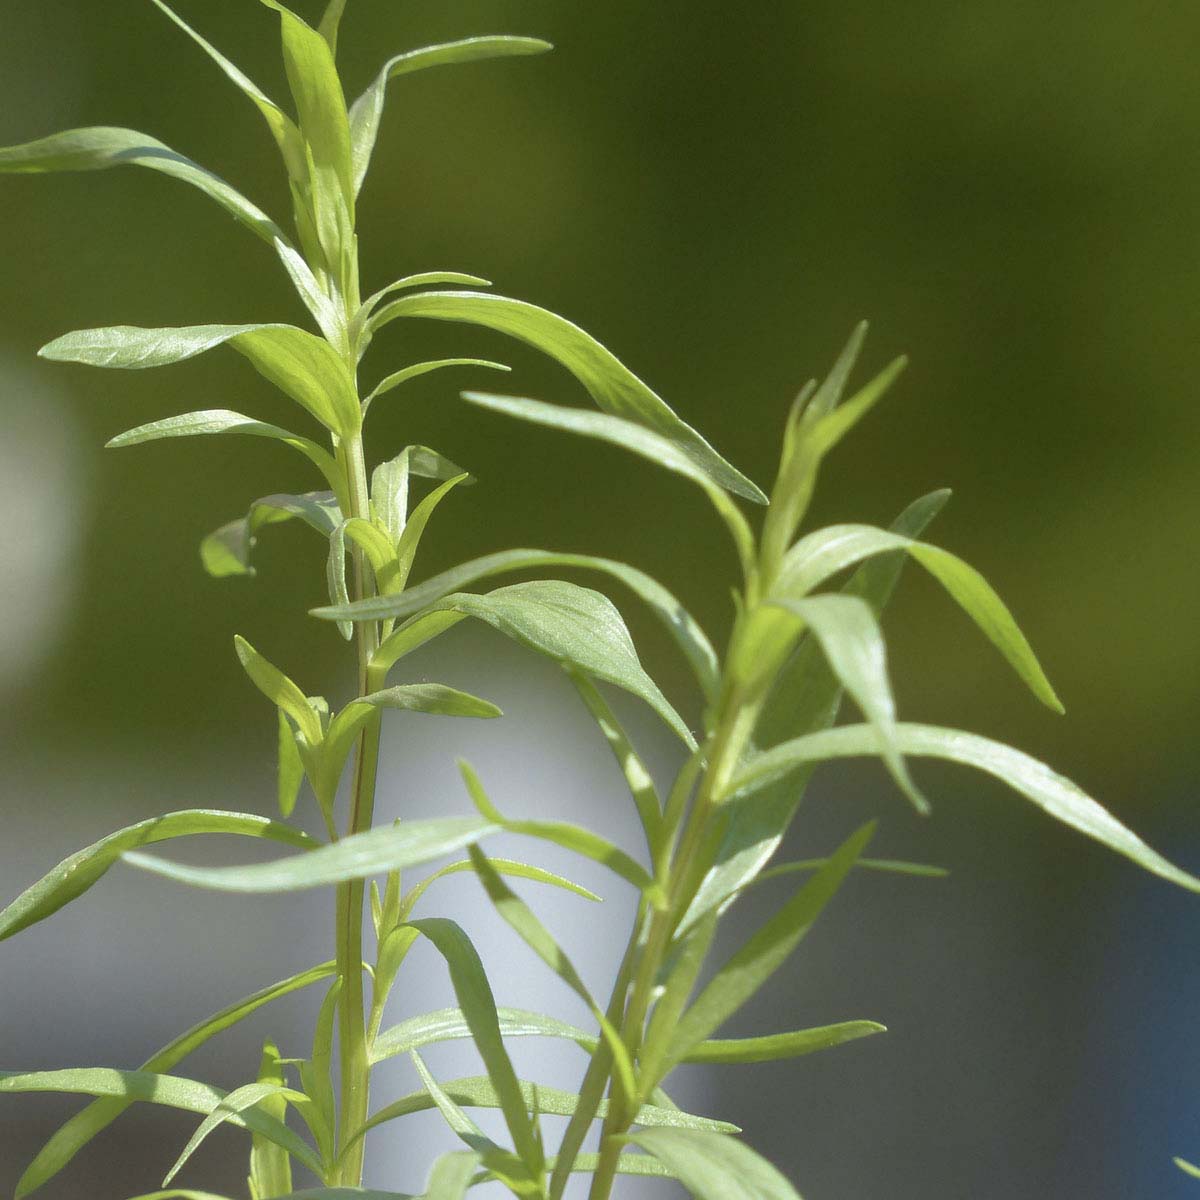 Tall, skiny stalks with long, skinny leaves. tarragon plant.